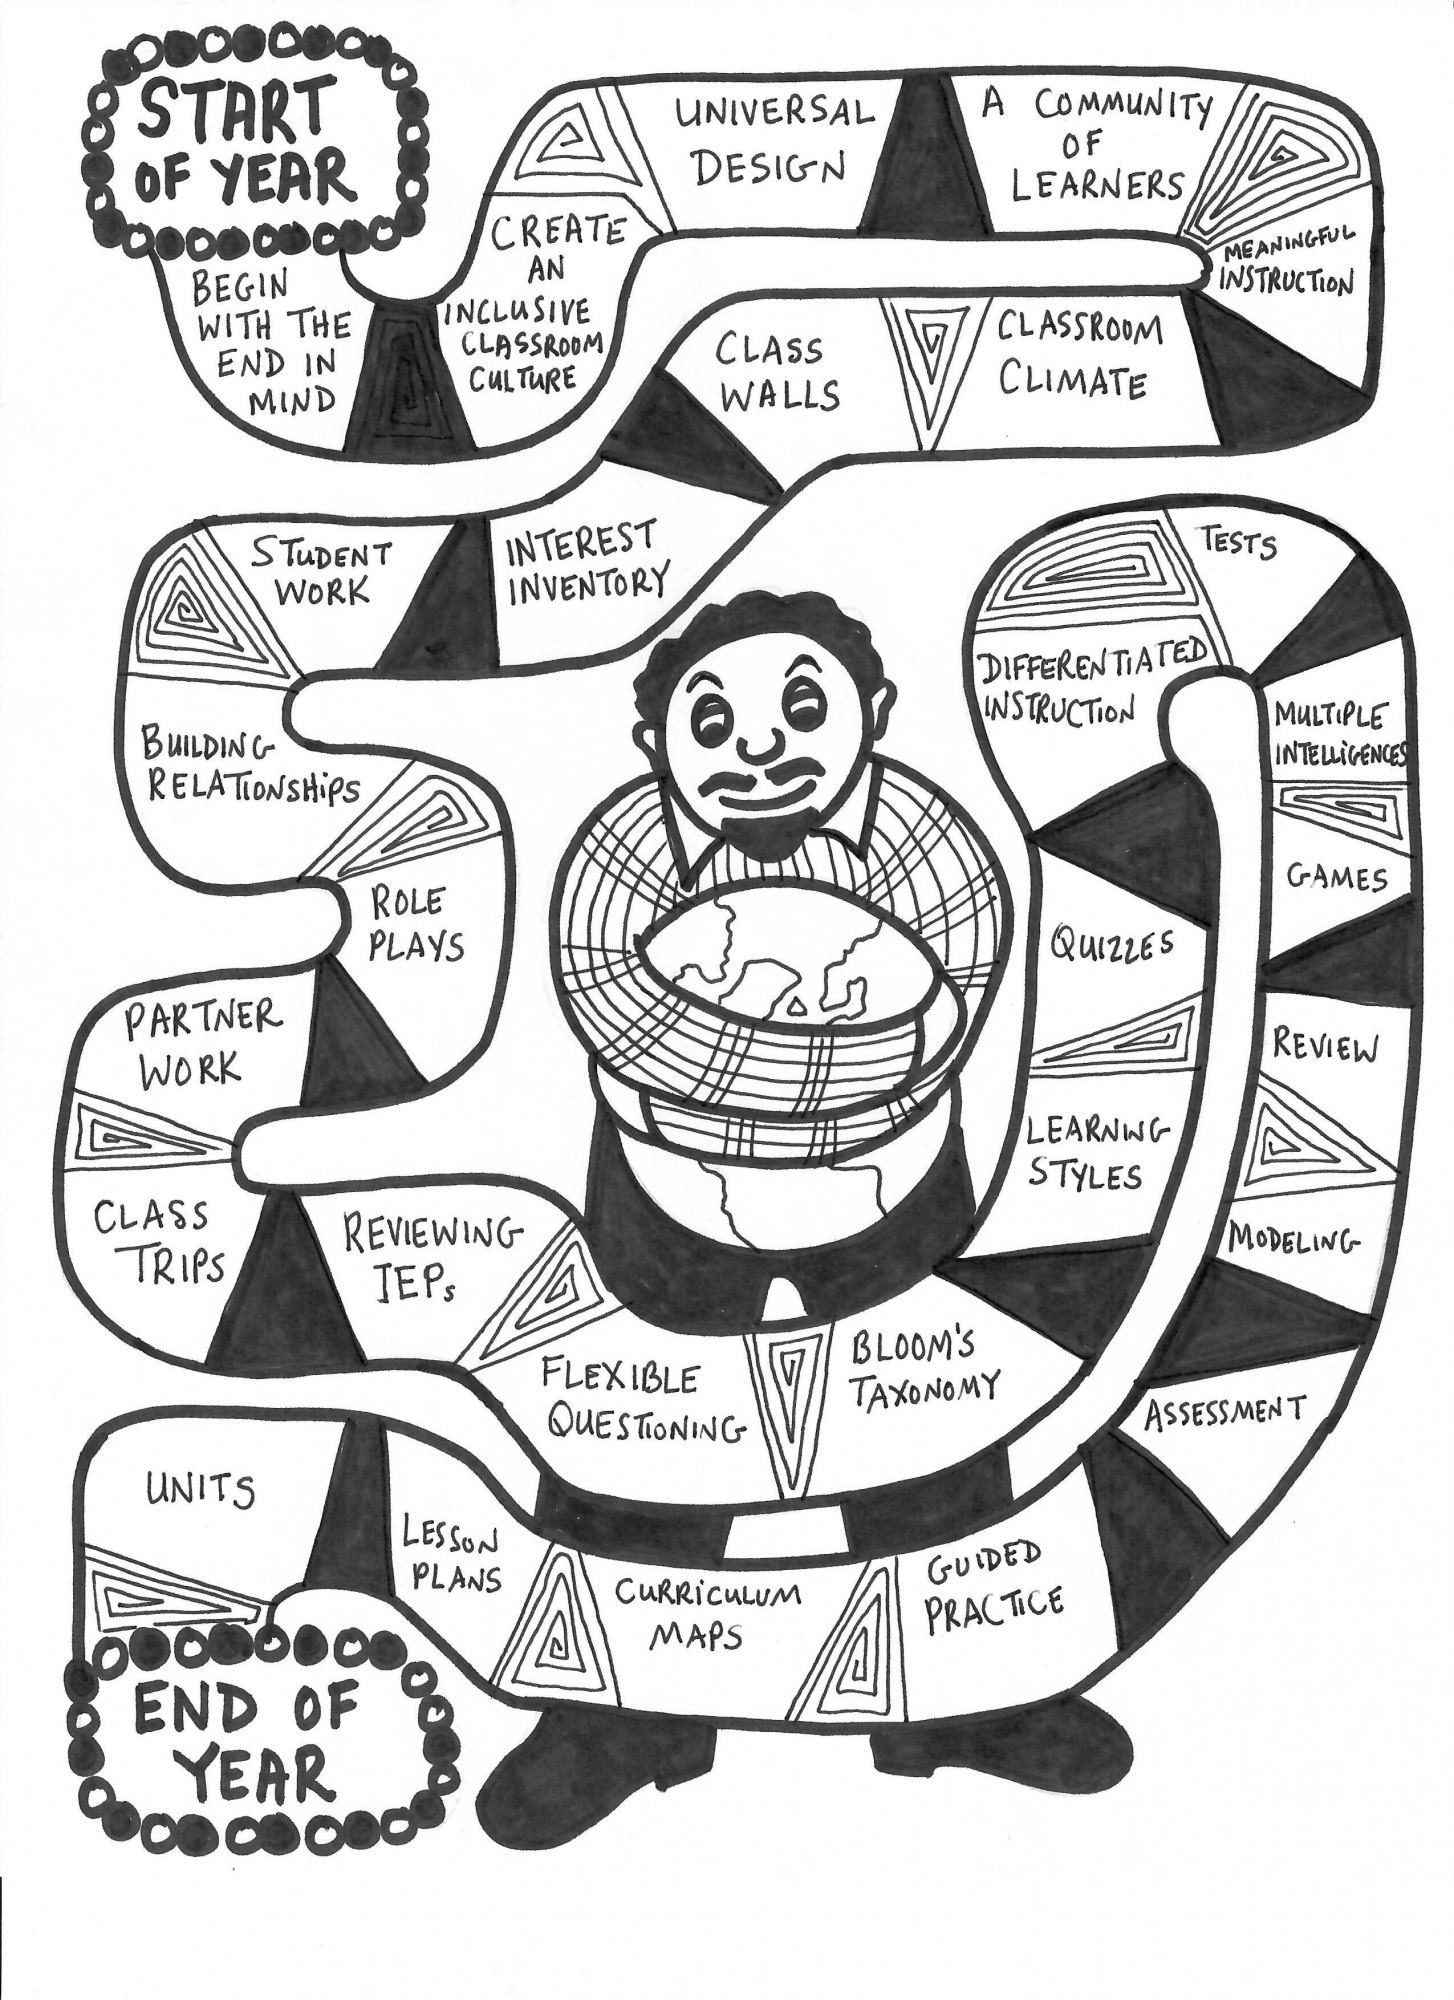 </span></span>A black-and-white hand-drawn game board resembling a road map from Point A to Point B. It’s a simple, fun way for teachers to help provide all students with instruction that matches their needs over a school year. Start the year by keeping the end in mind, create an inclusive classroom with a universal design … end the year after experiencing field trips, differentiated instruction, tests, guided practice, review and modeling.<span>